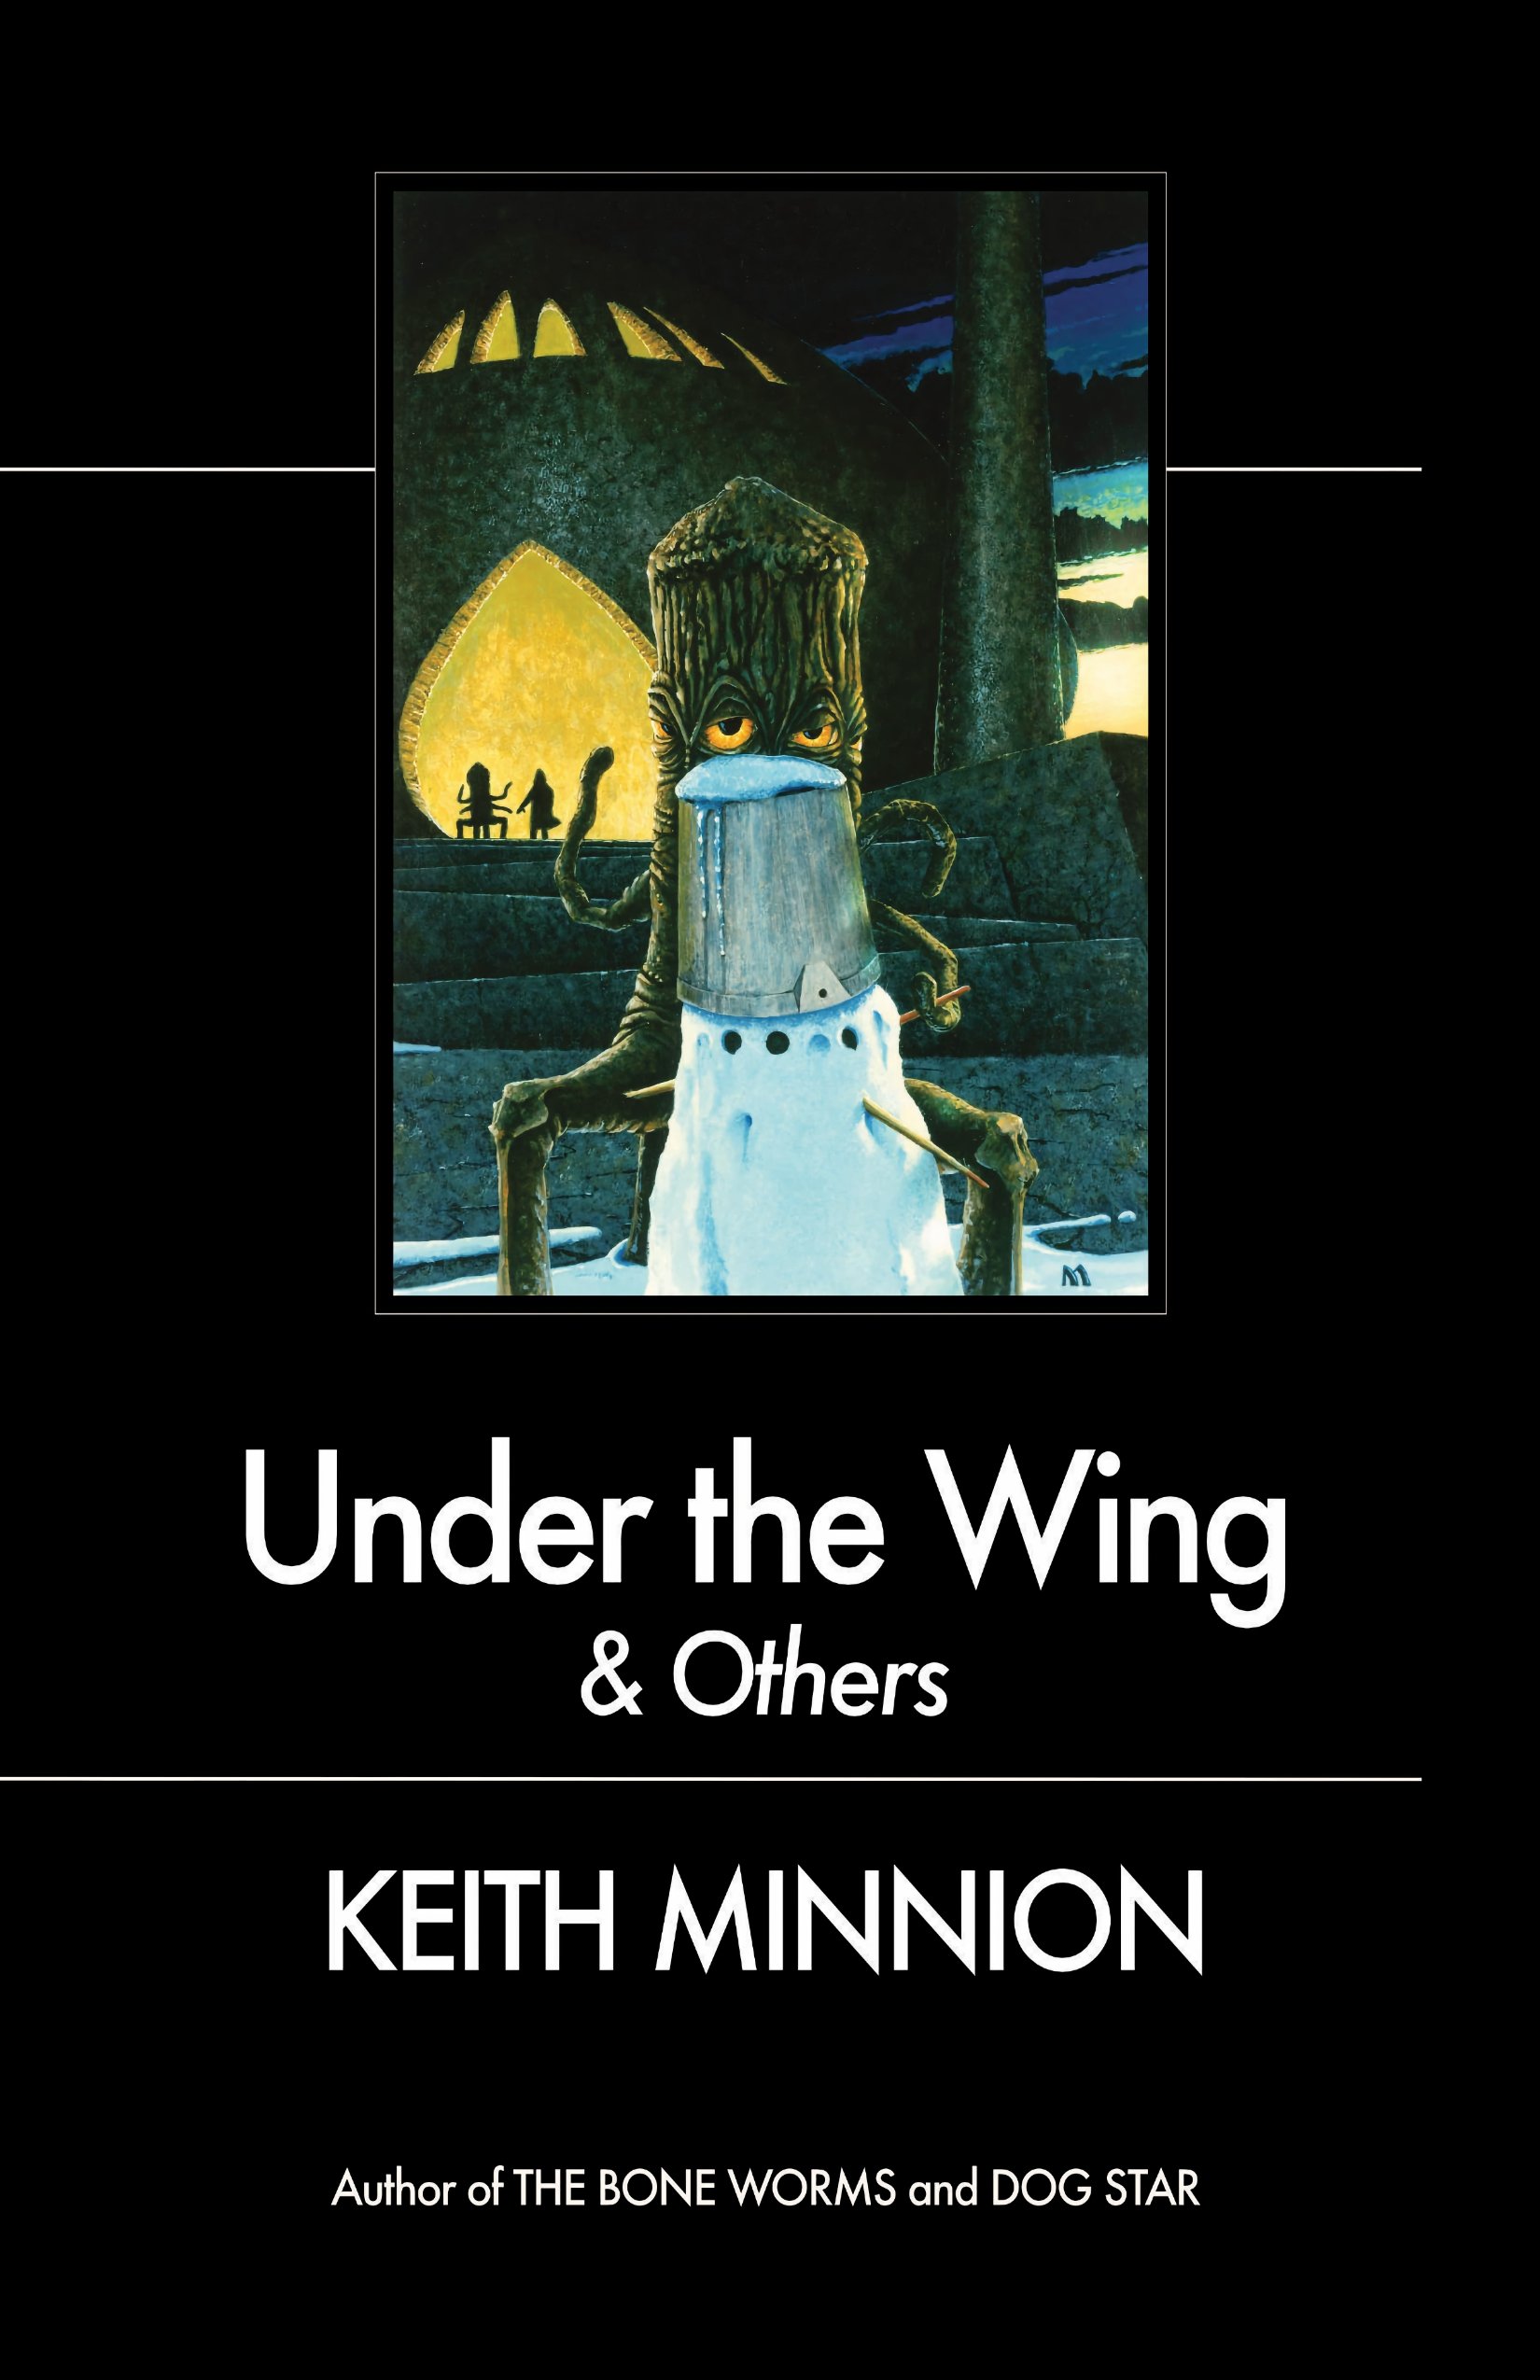 Under the Wing & Others